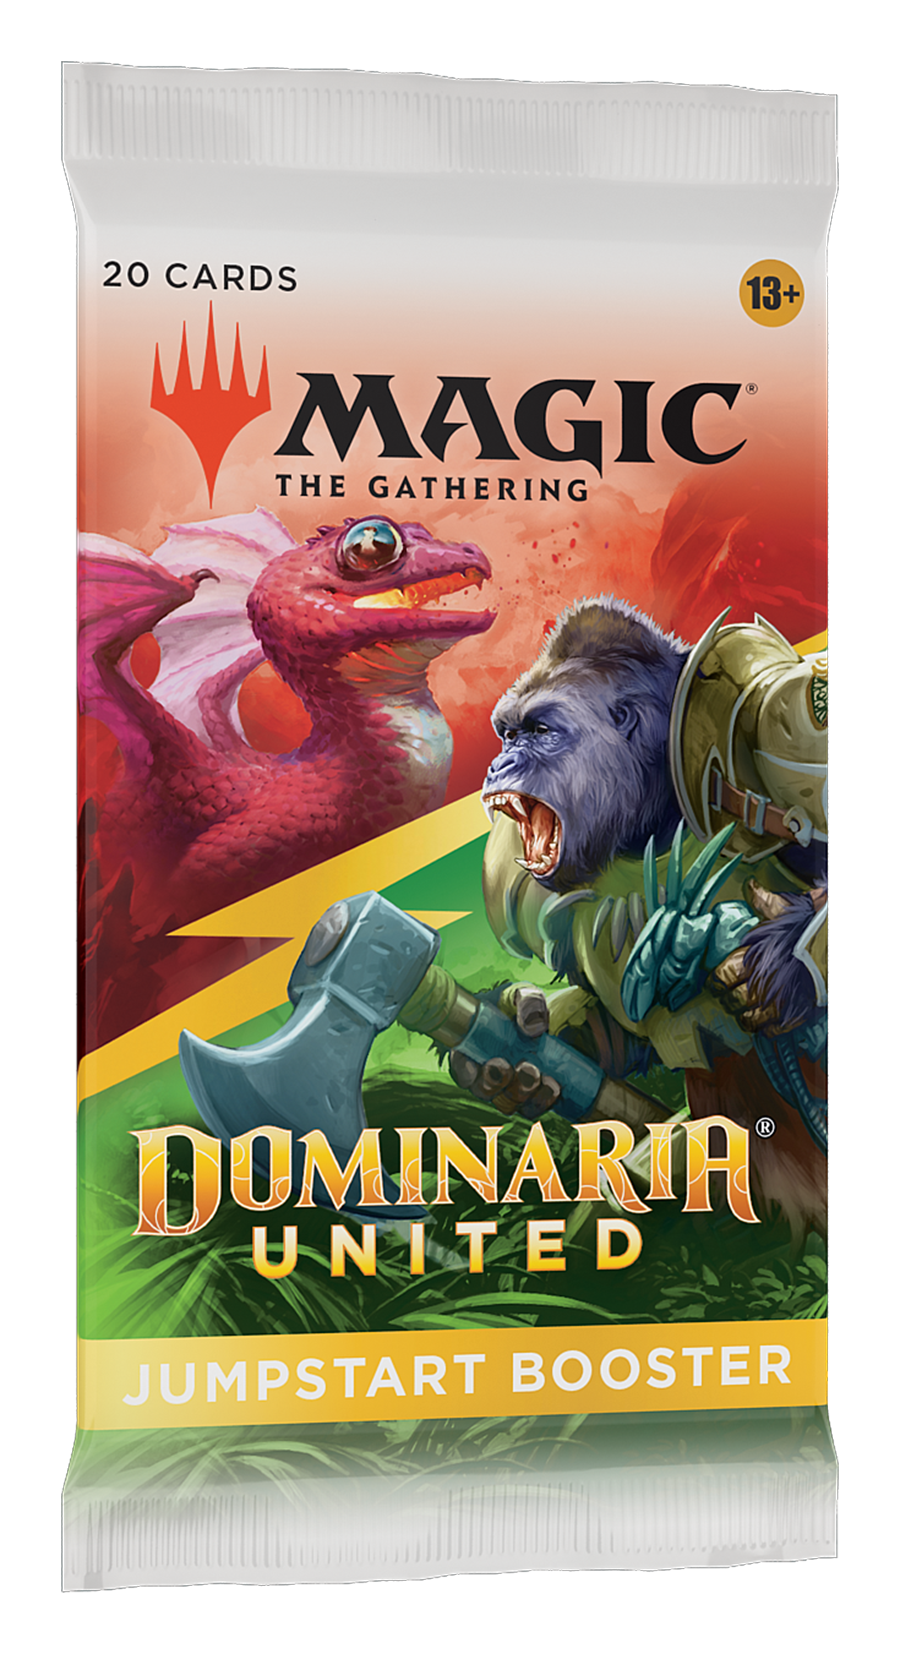 Magic the Gathering: Dominaria United Jumpstart Booster Pack